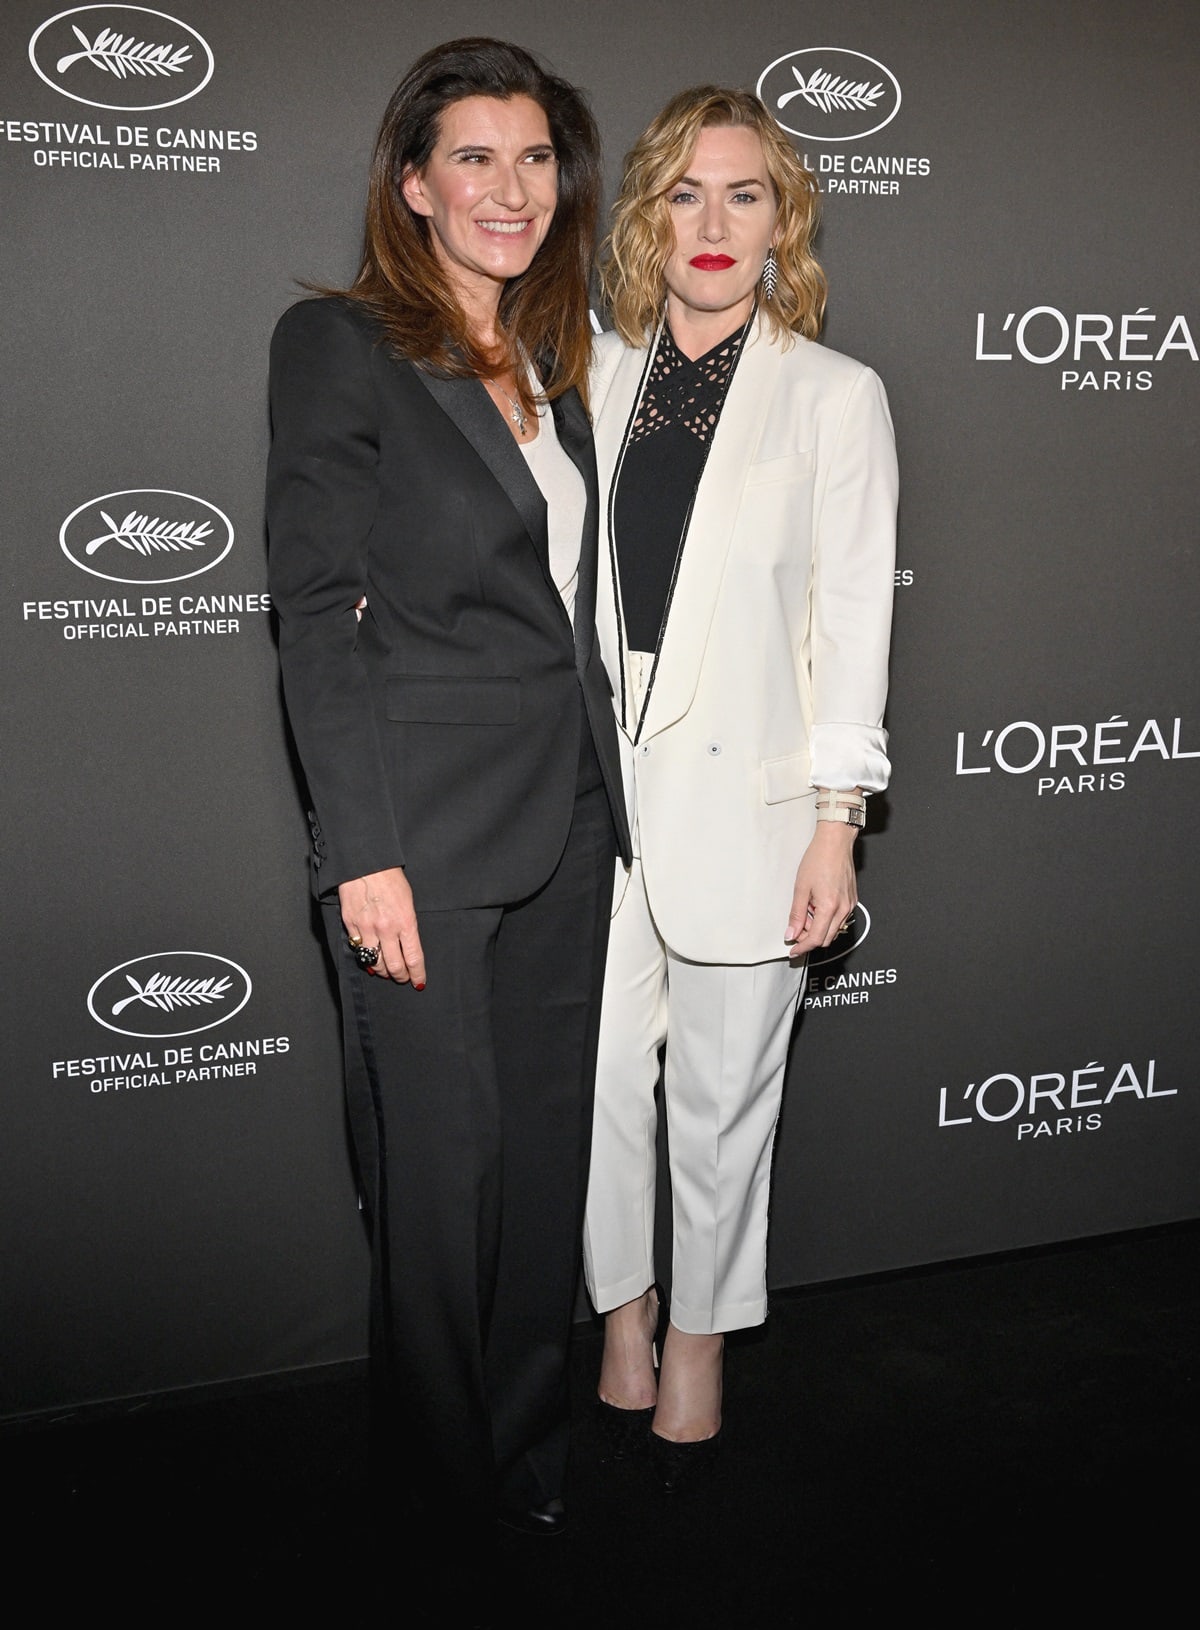 Delphine Viguier-Hovasse and Kate Winslet attended the L'Oreal - Lights on Women Award at the 76th annual Cannes film festival